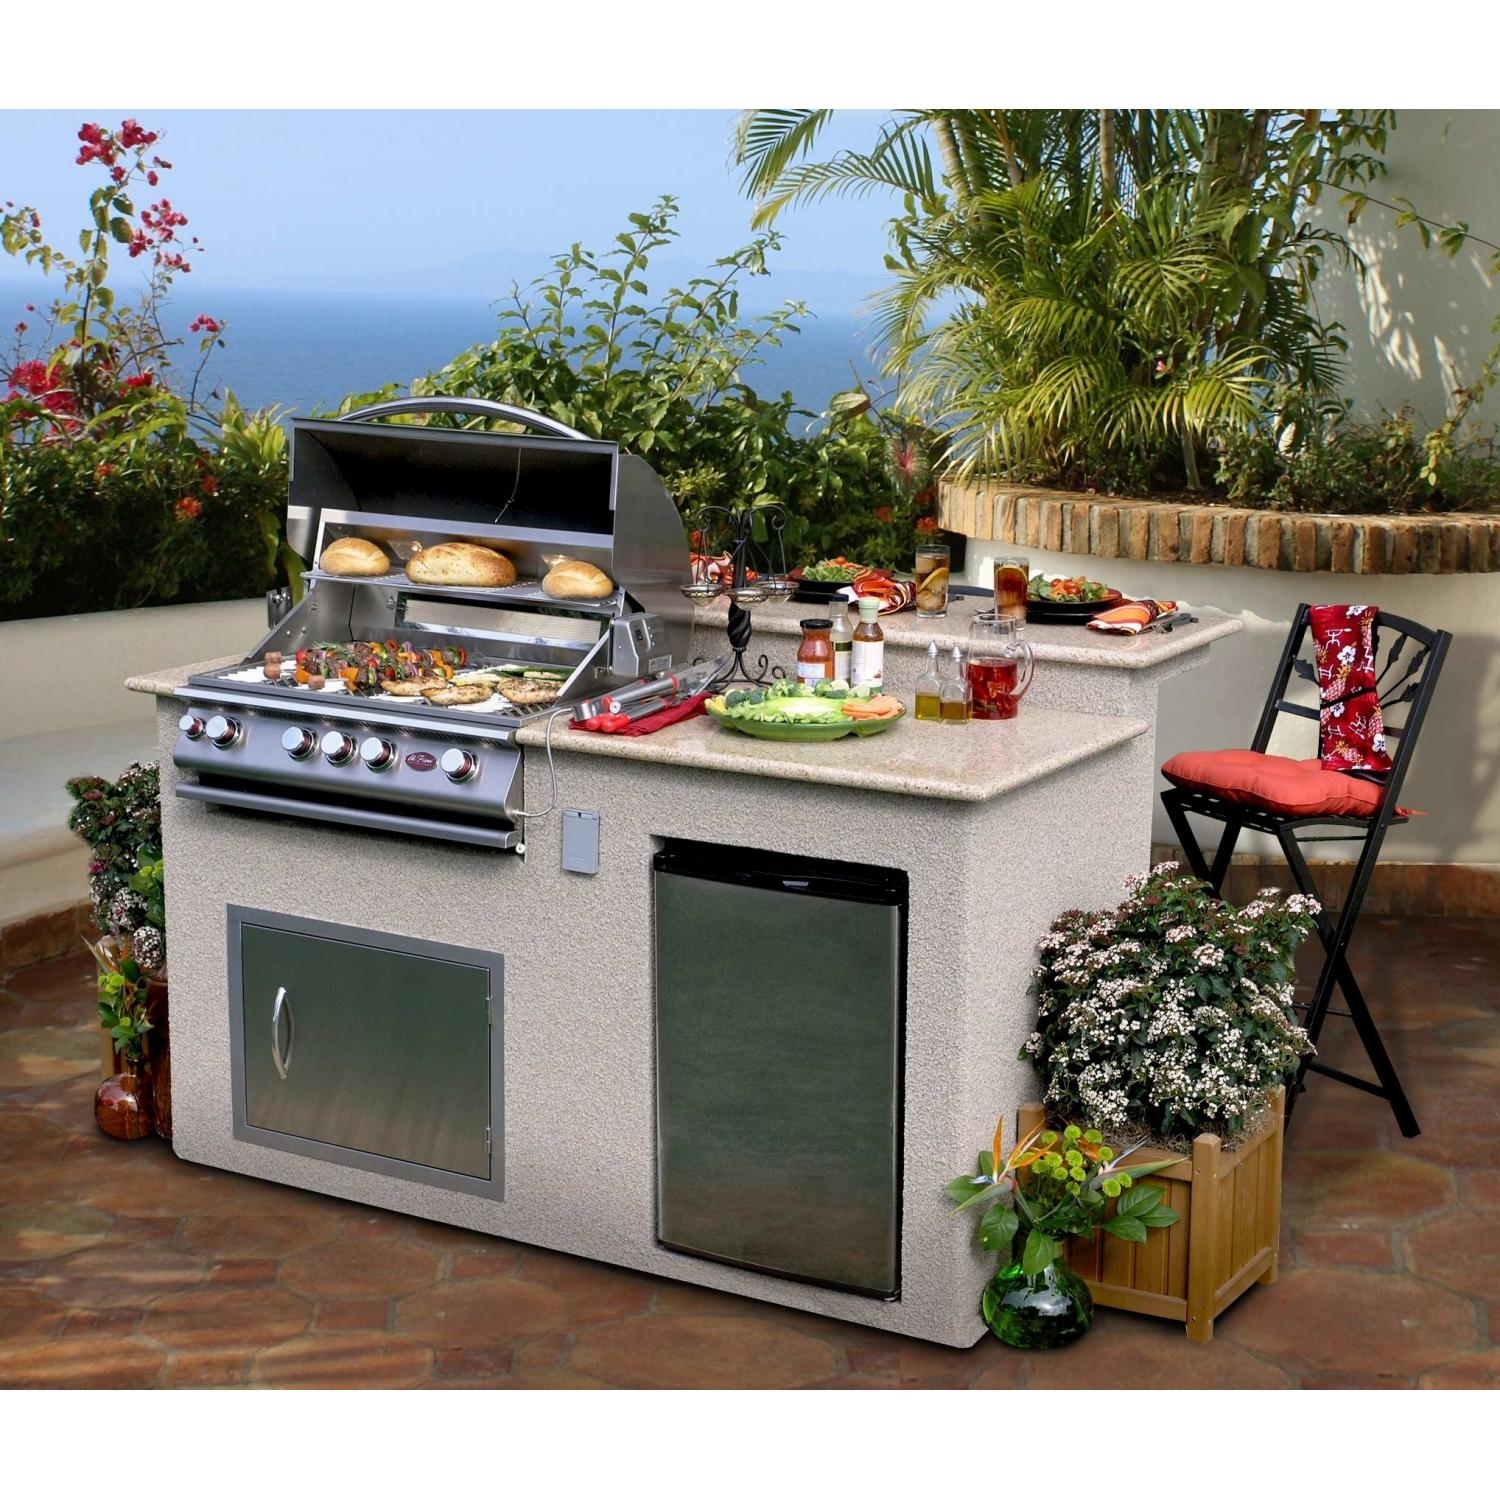 Prefabricated Outdoor Grill Islands